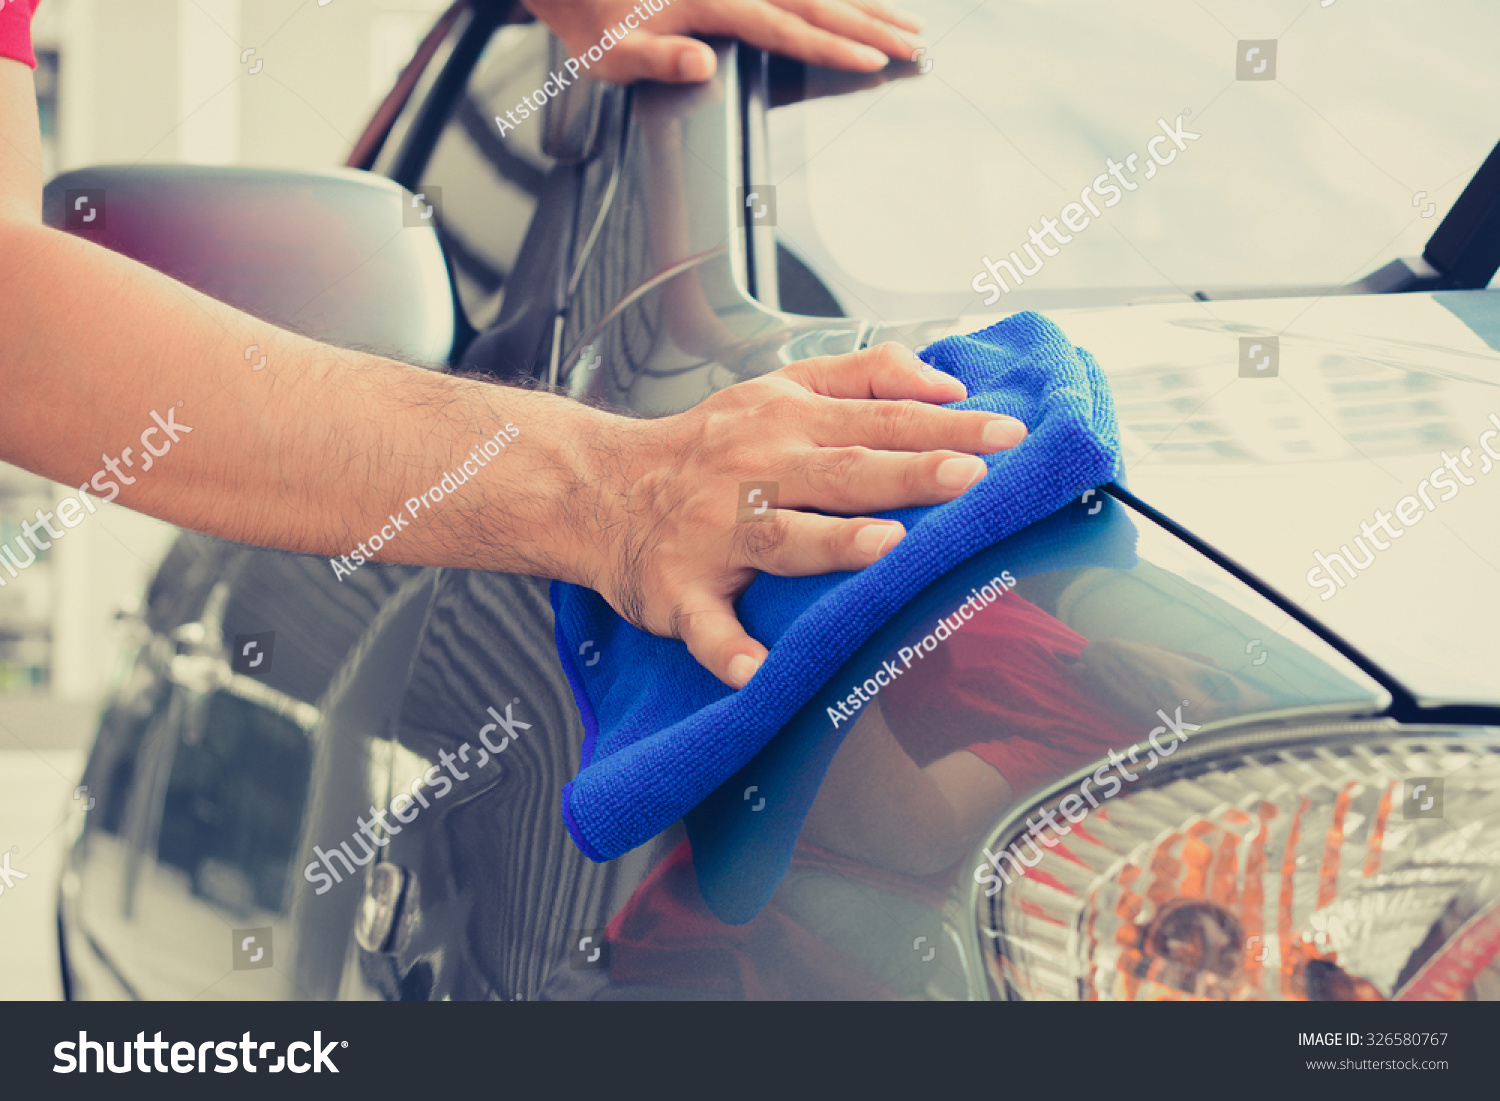 A man hand cleaning car with microfiber cloth #326580767